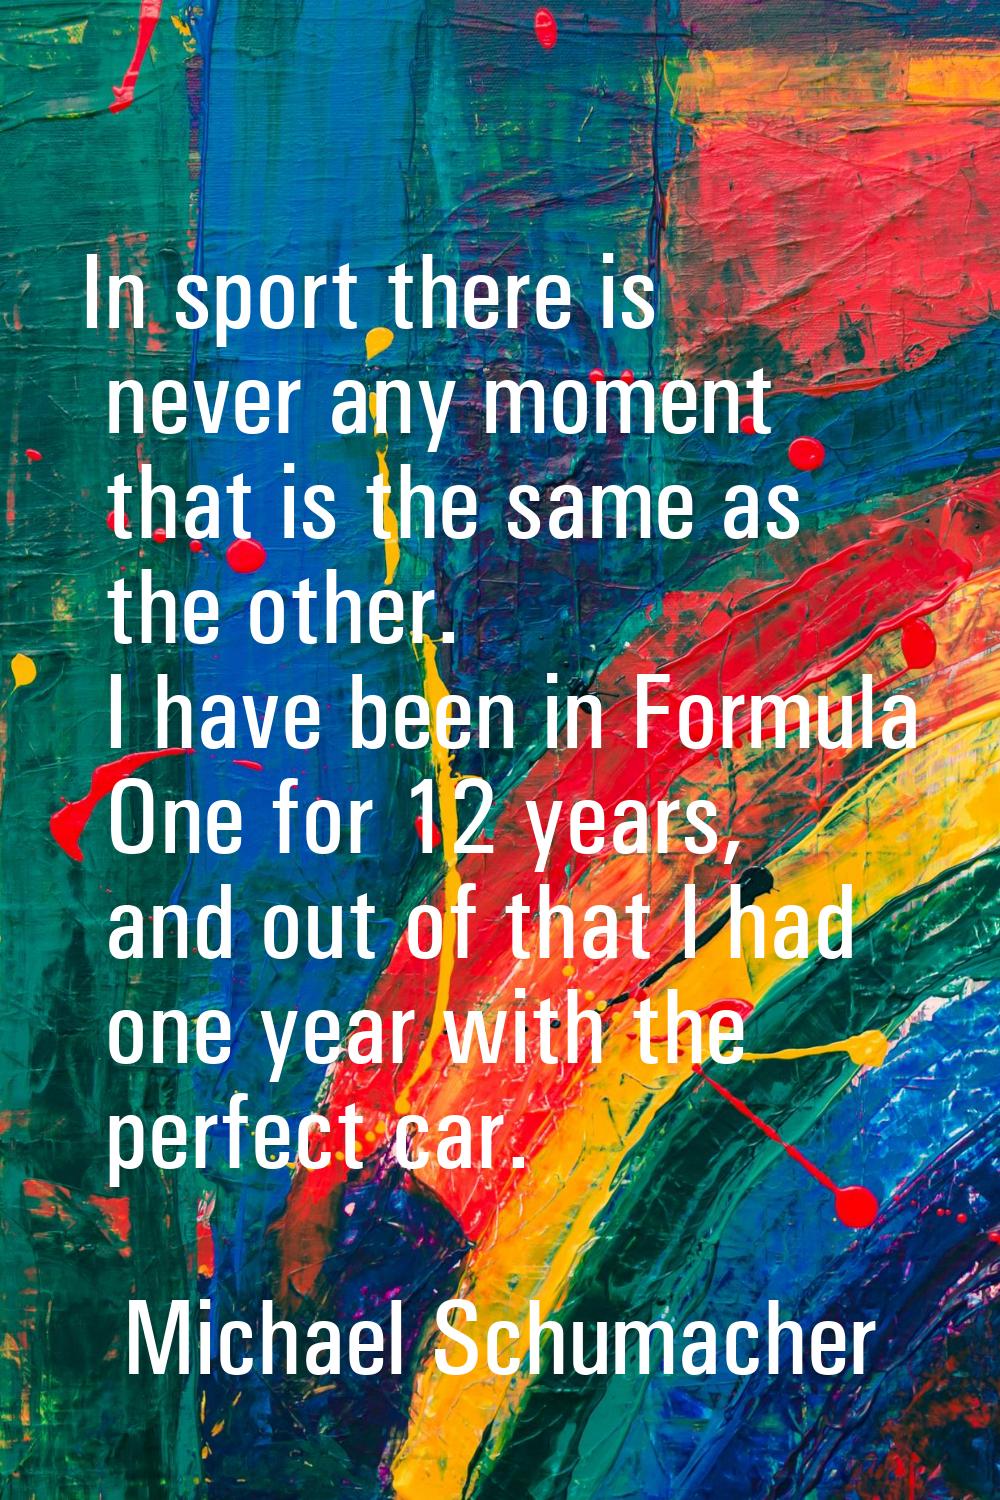 In sport there is never any moment that is the same as the other. I have been in Formula One for 12